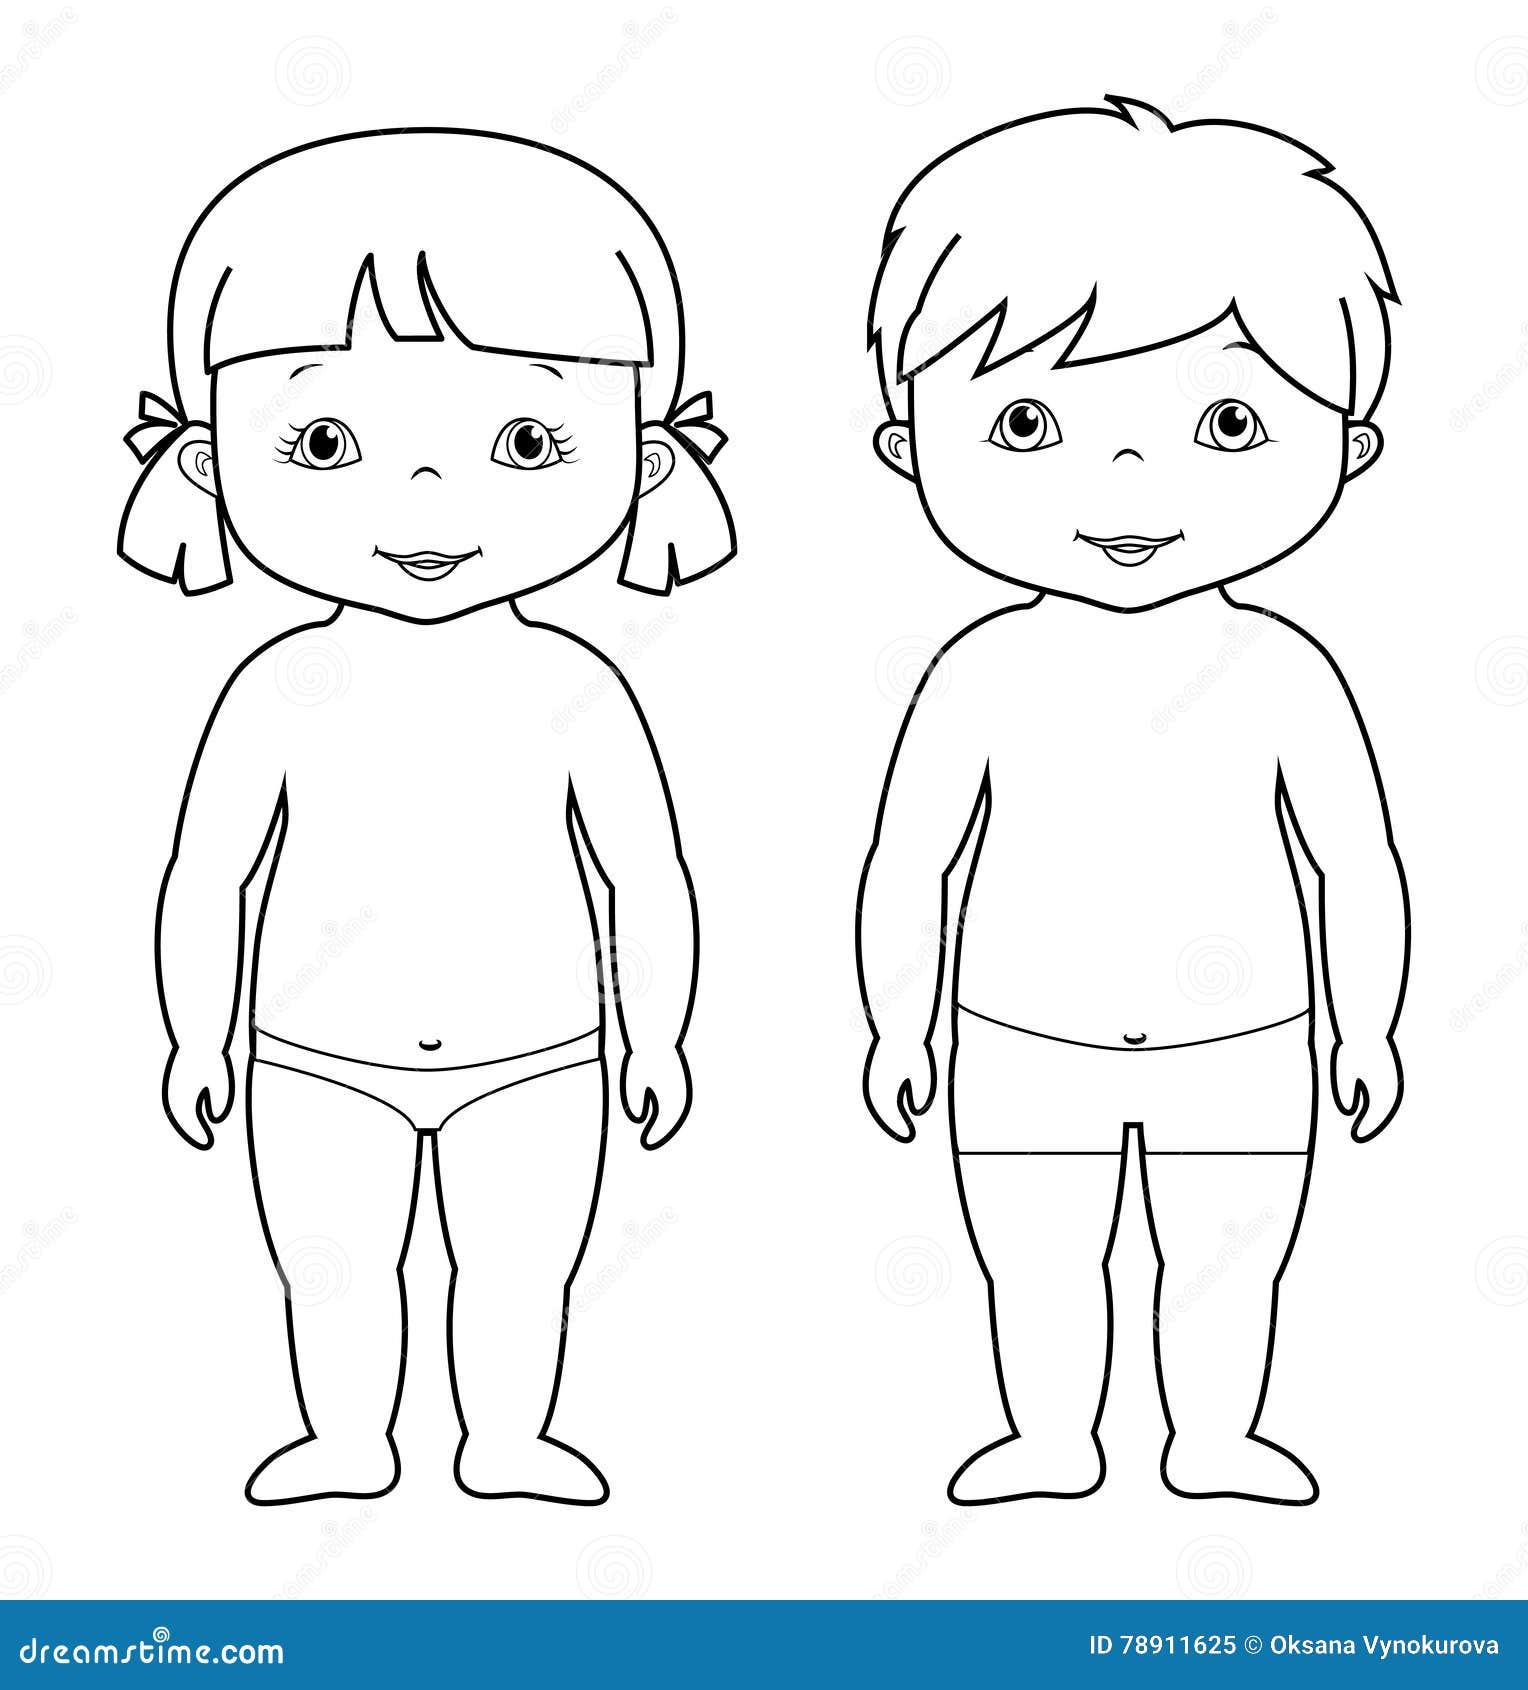 Boy Body Coloring Page T14 Coloring Pages Manufacture